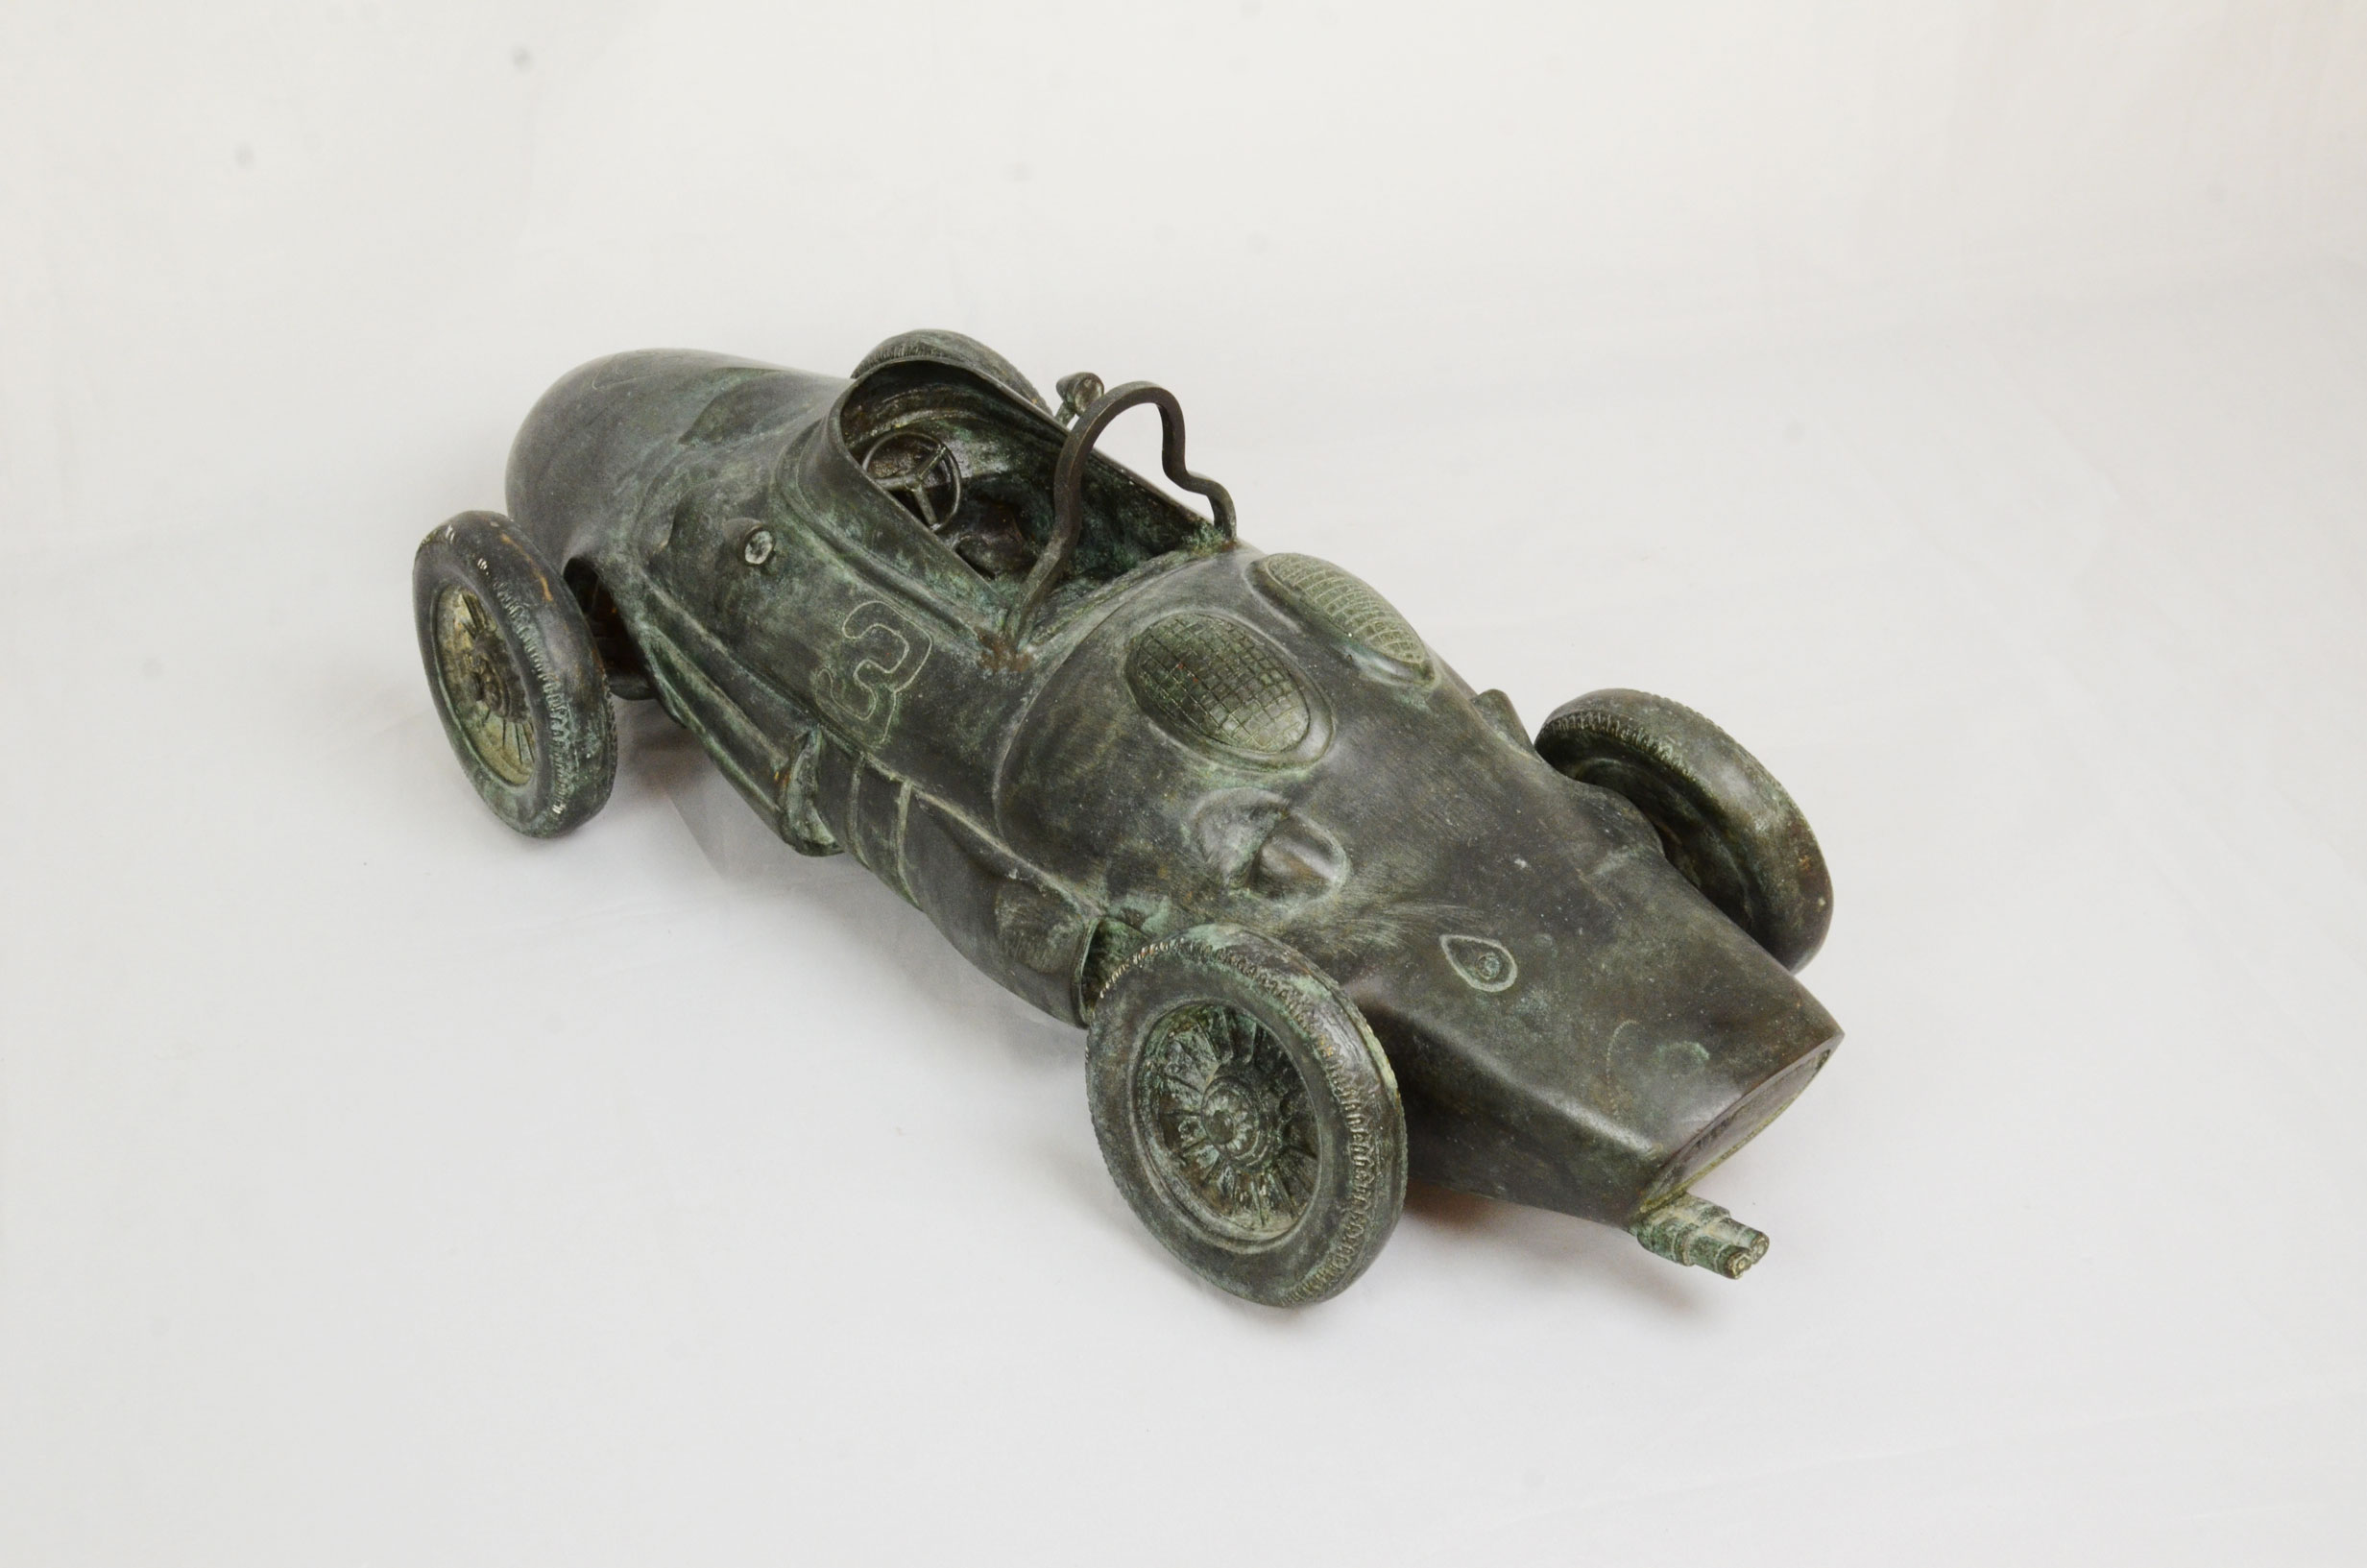 Vintage all brass racing car statue